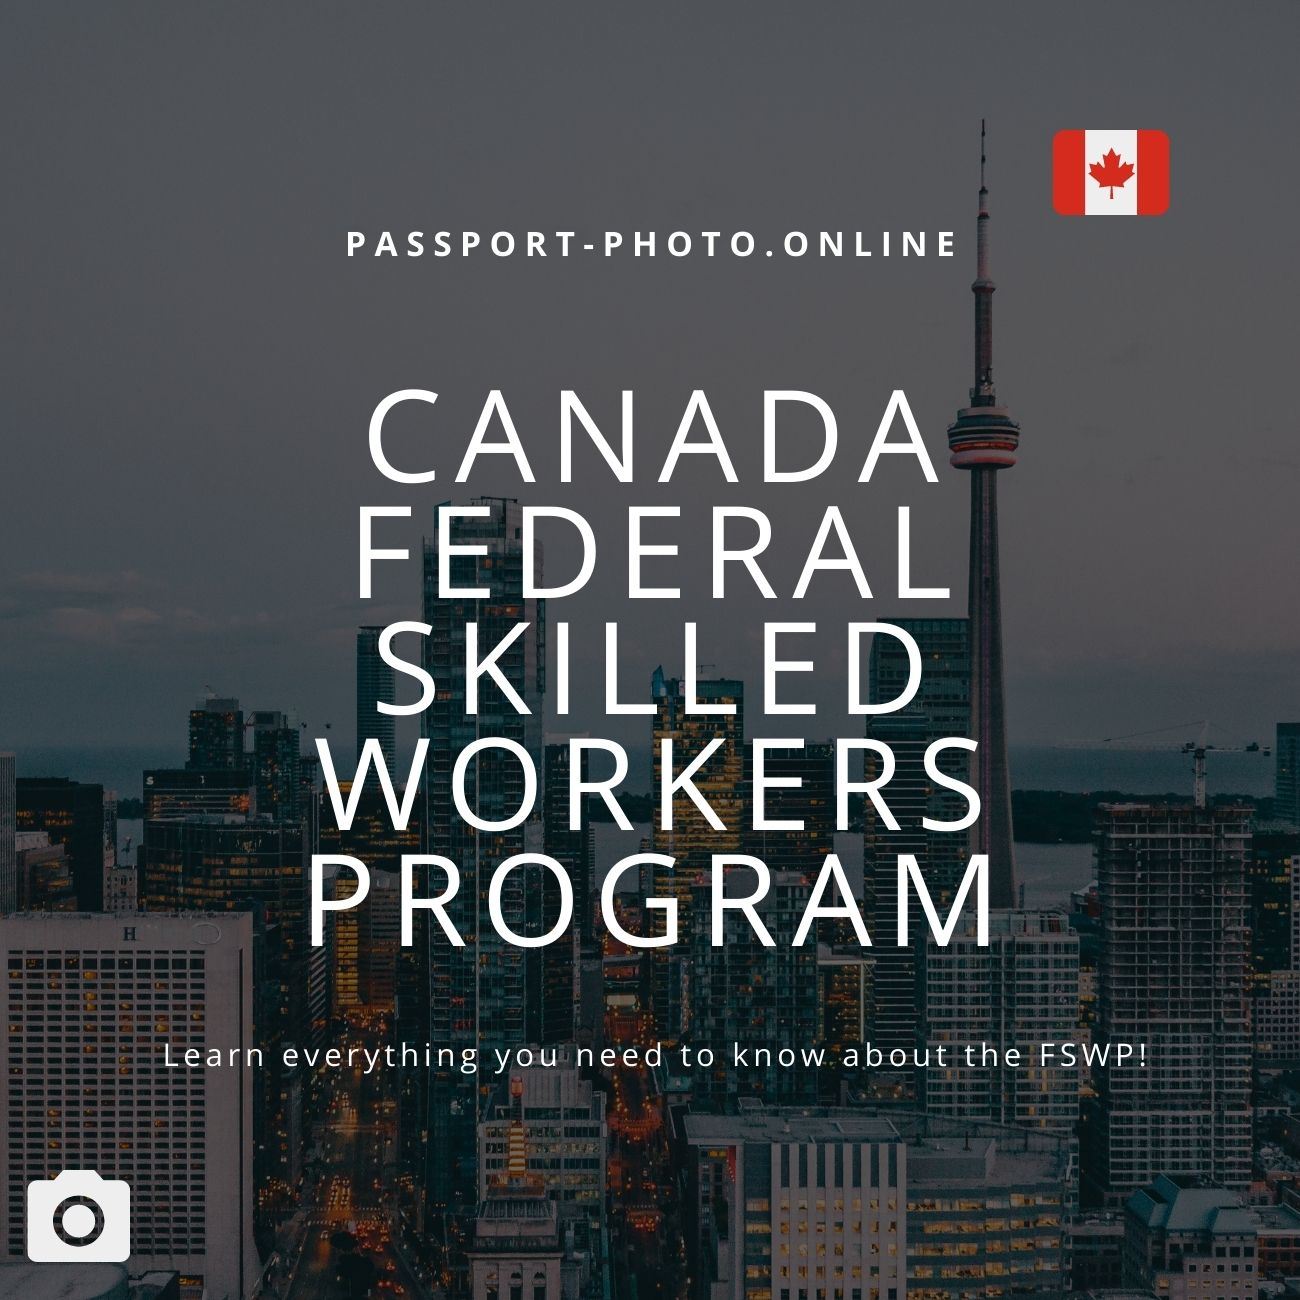 Canada Federal Skilled Workers Program